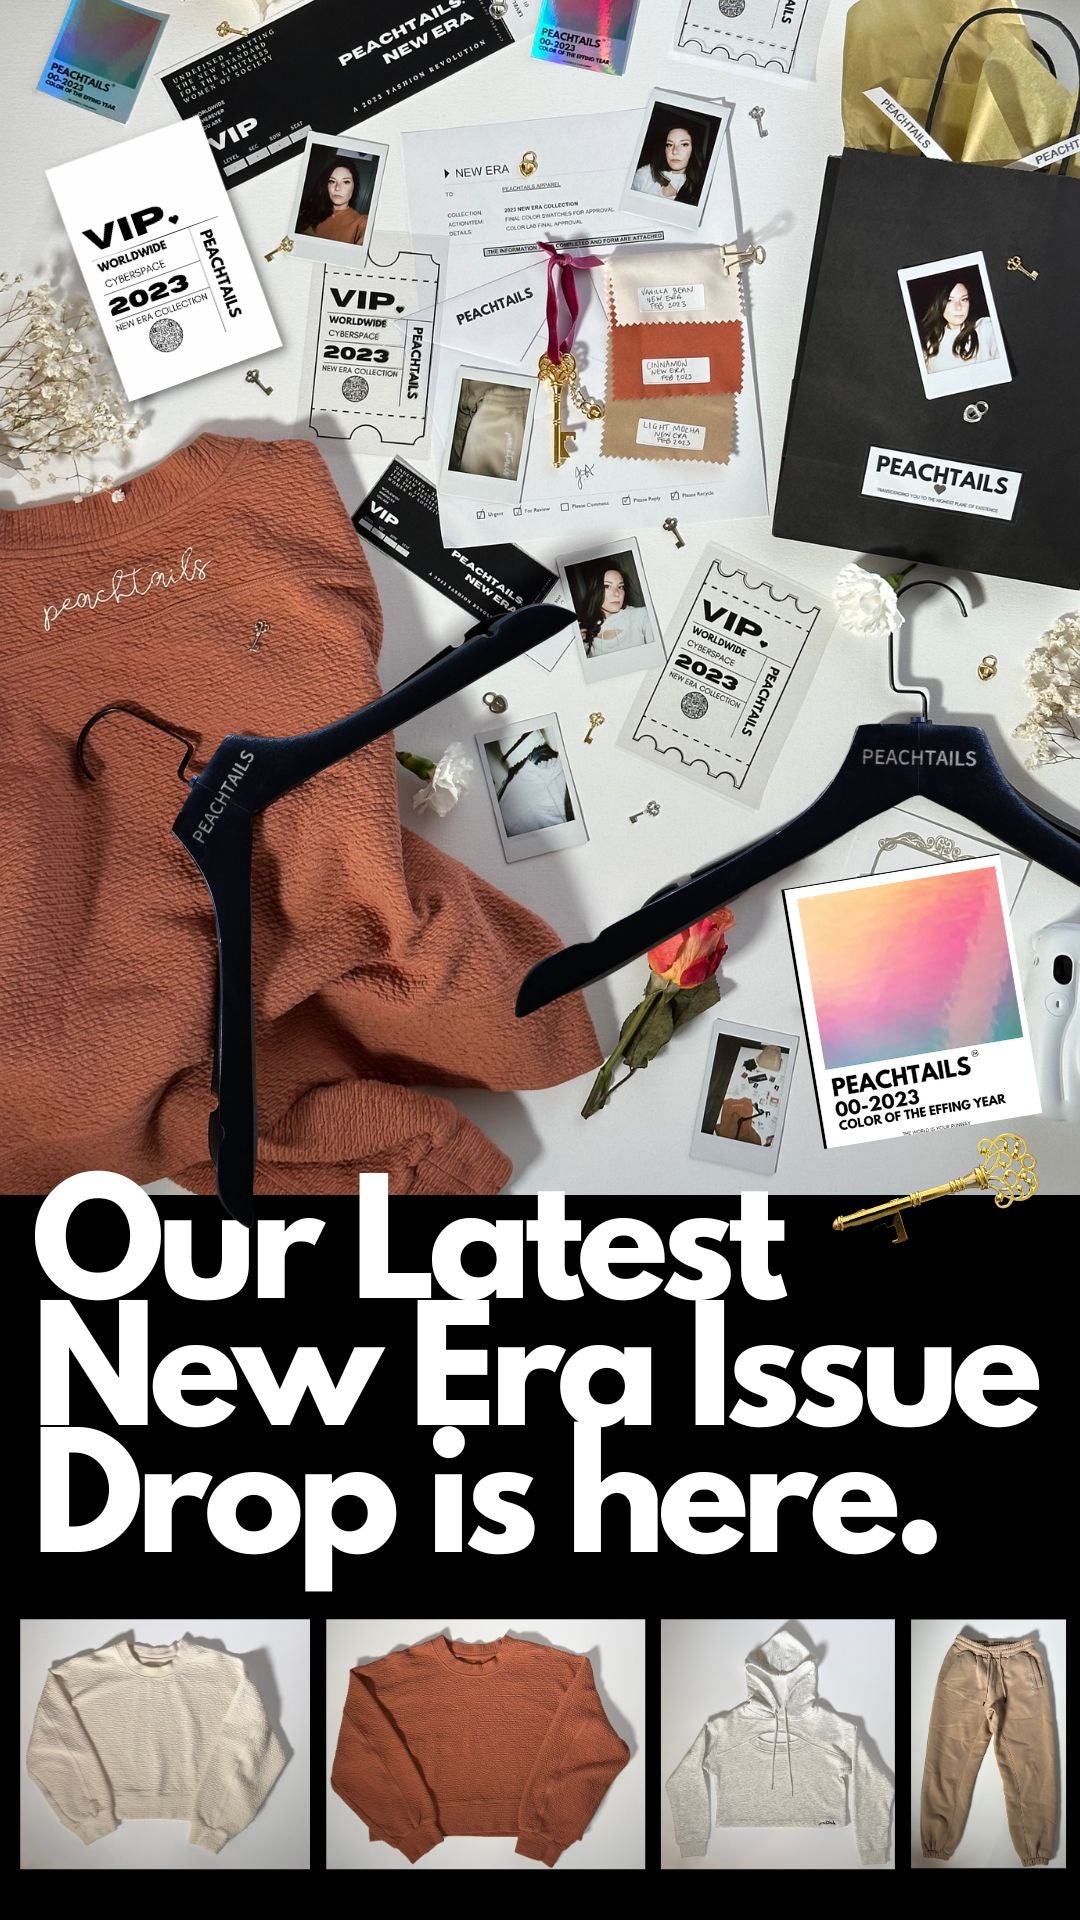 The image is a promotional collage for PEACHTAILS, announcing "Our Latest New Era Issue Drop is here." The background is cluttered with VIP cards, clothing tags, a hanger holding a textured peach sweater, and various PEACHTAILS branded items. At the bottom, the clothing pieces from the new issue are displayed: a beige sweater, a peach hoodie, and a pair of beige pants. The collage creates a sense of excitement and exclusivity for the new clothing release.